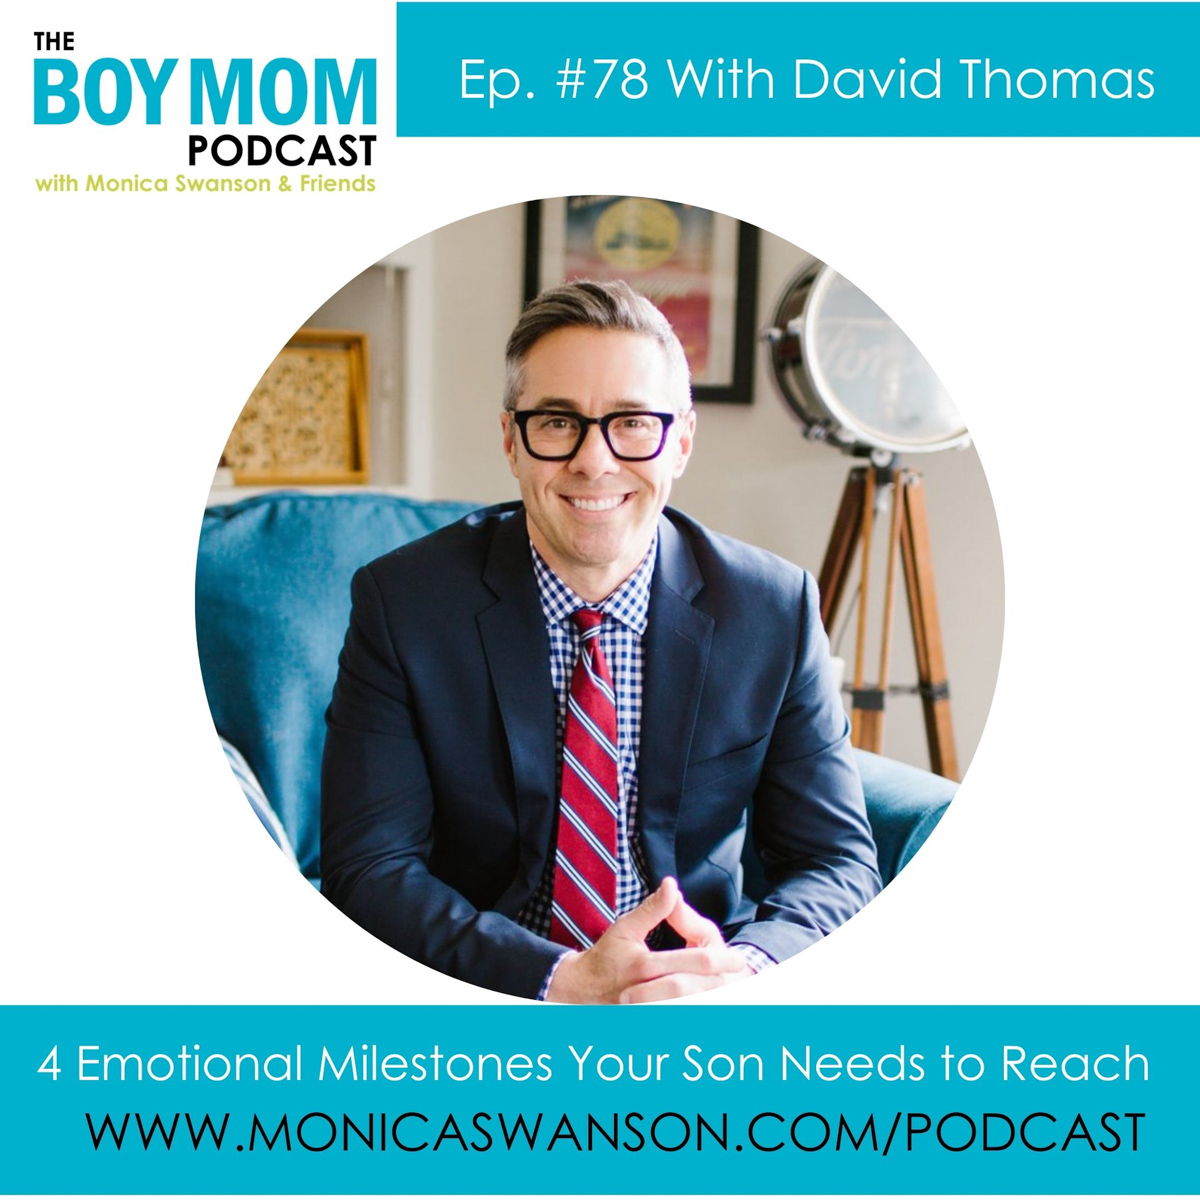 4 Emotional Milestones our Sons Need to Reach. {Episode 78 with David Thomas}